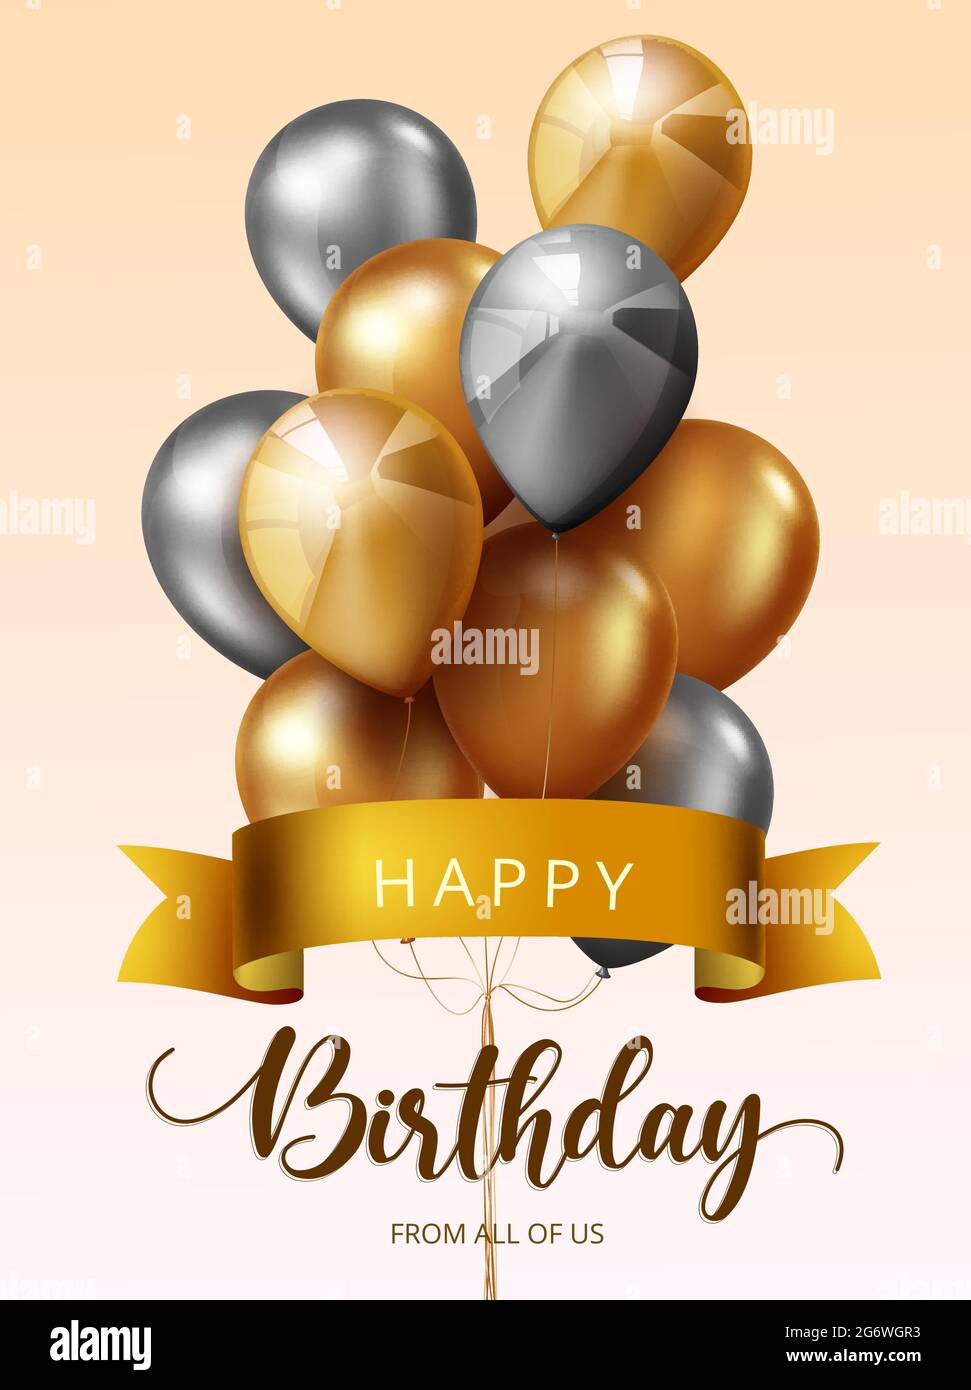 Birthday balloons vector design. Happy birthday greeting text with ...